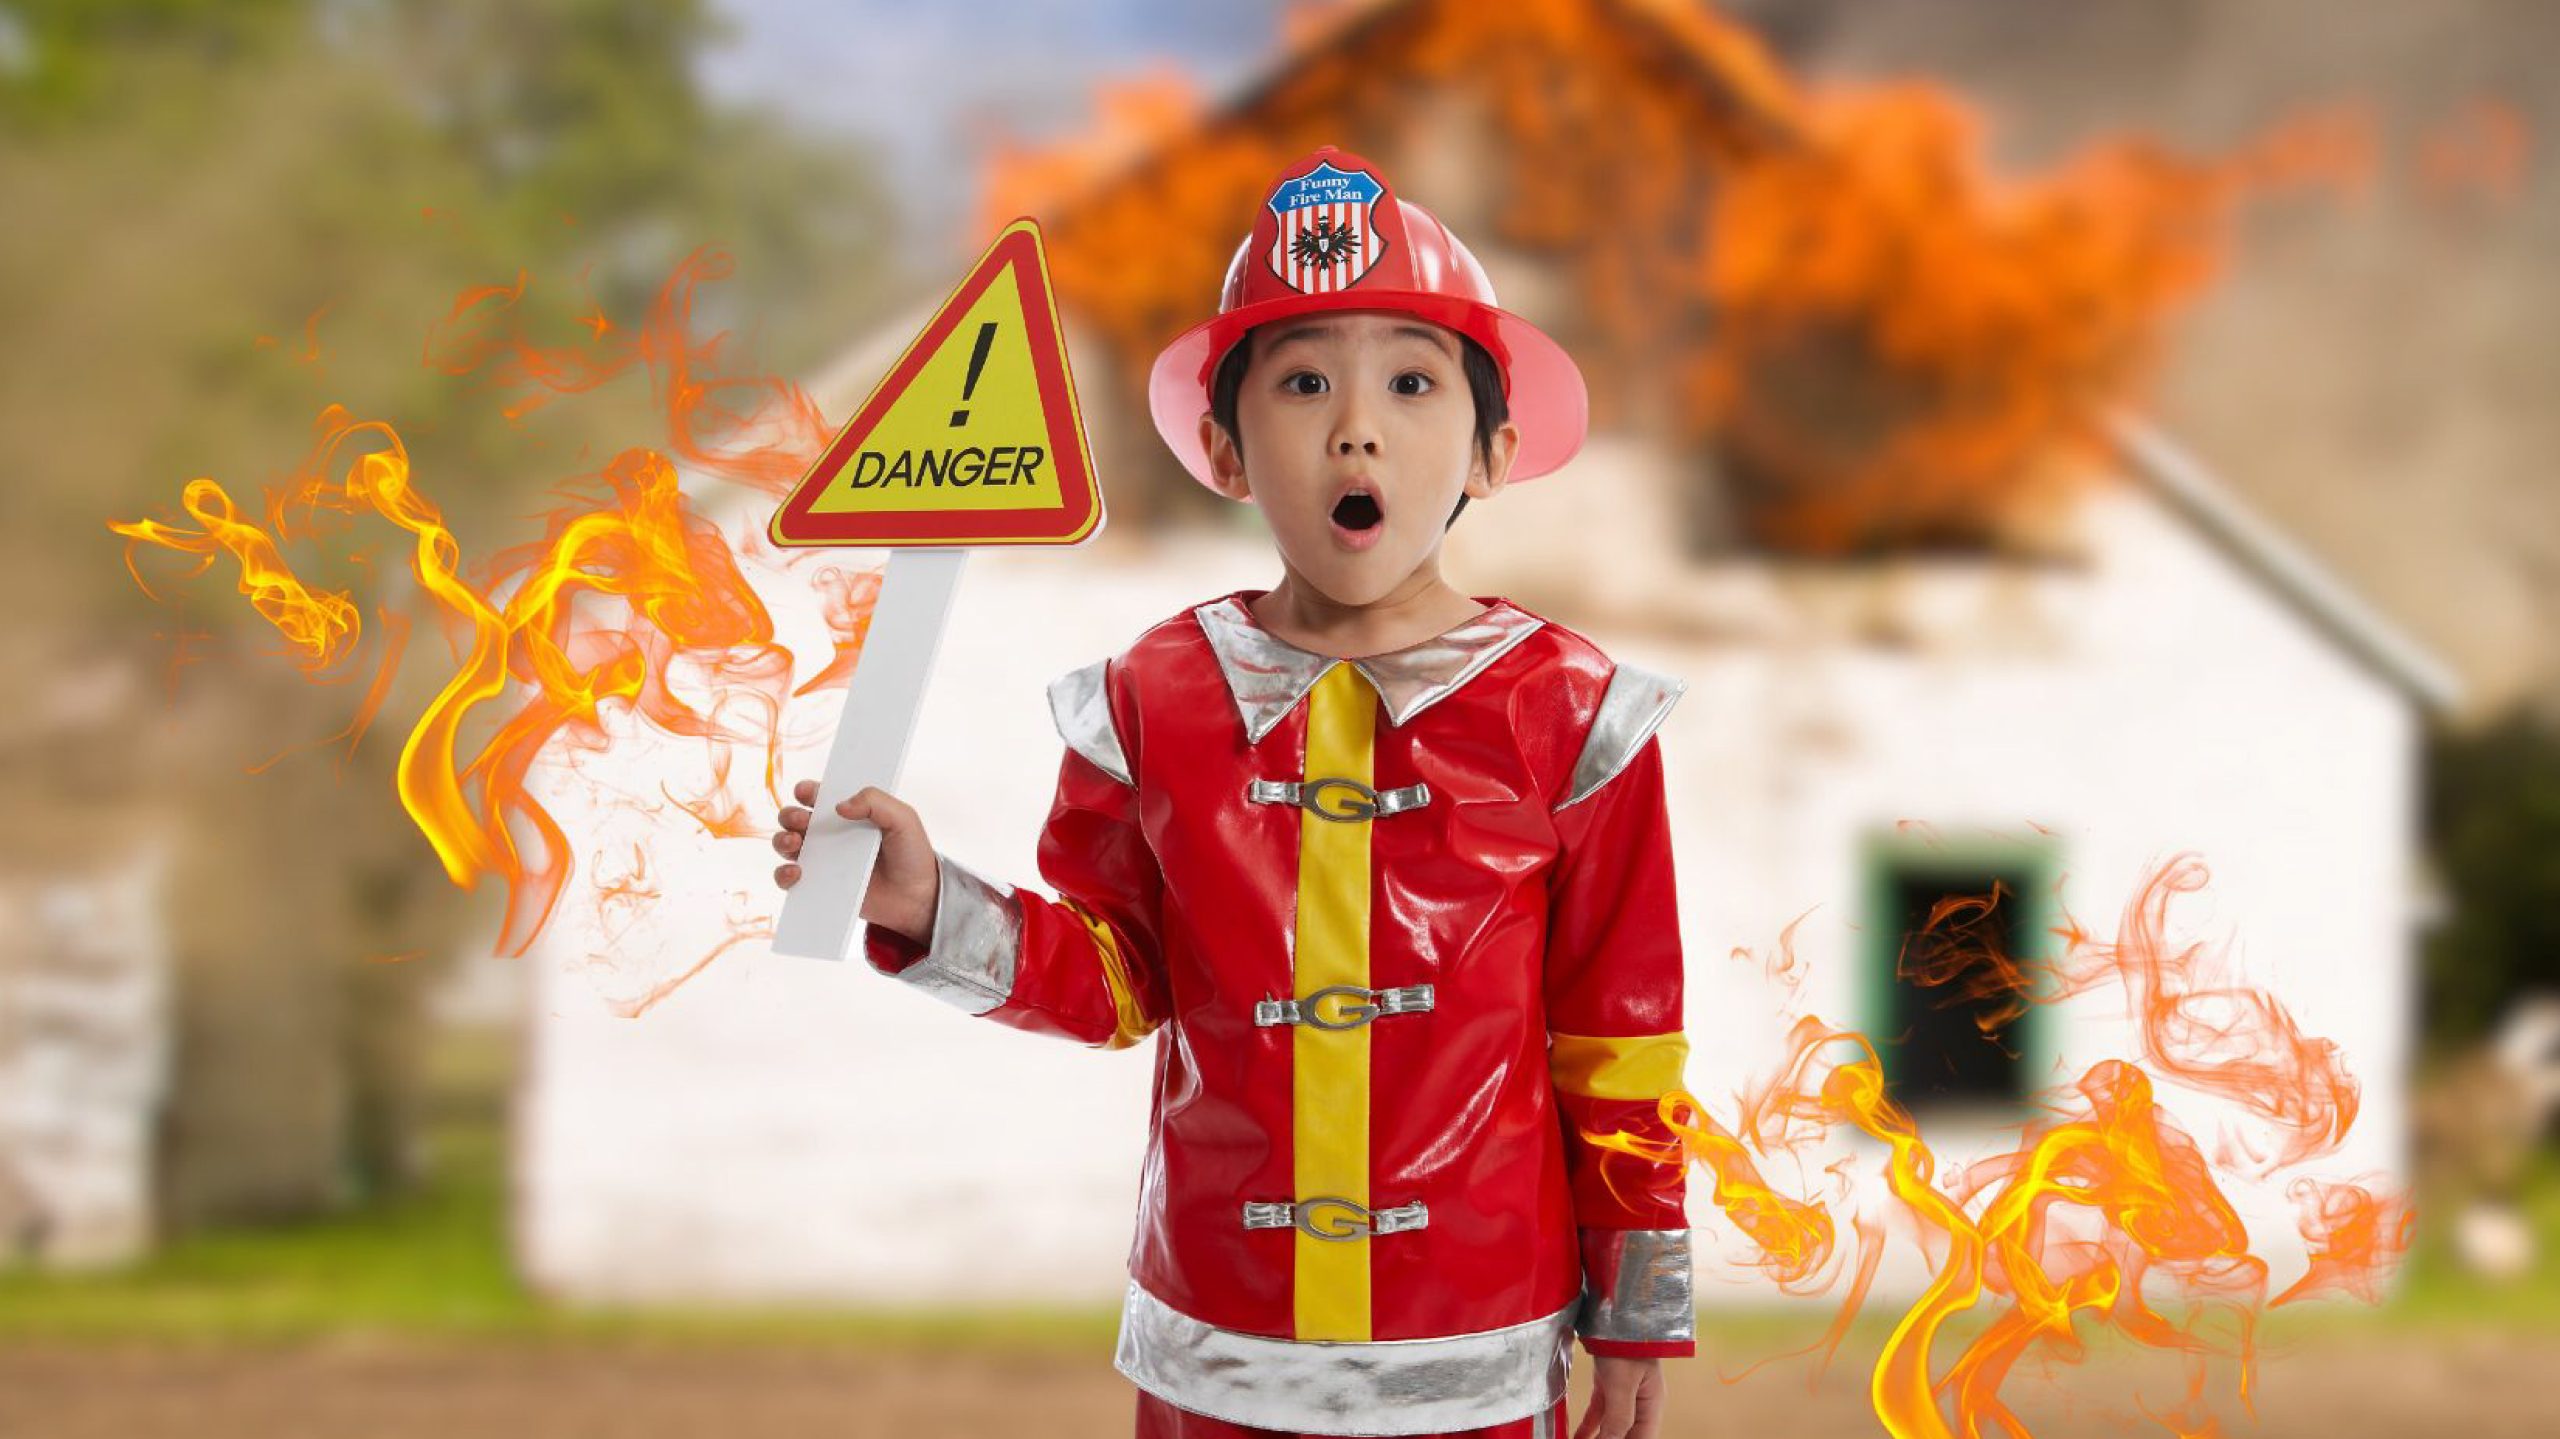 FIRE! HELP! : Here’s What Every Parent Needs to Know to Keep Their Kids Safe from Fires!